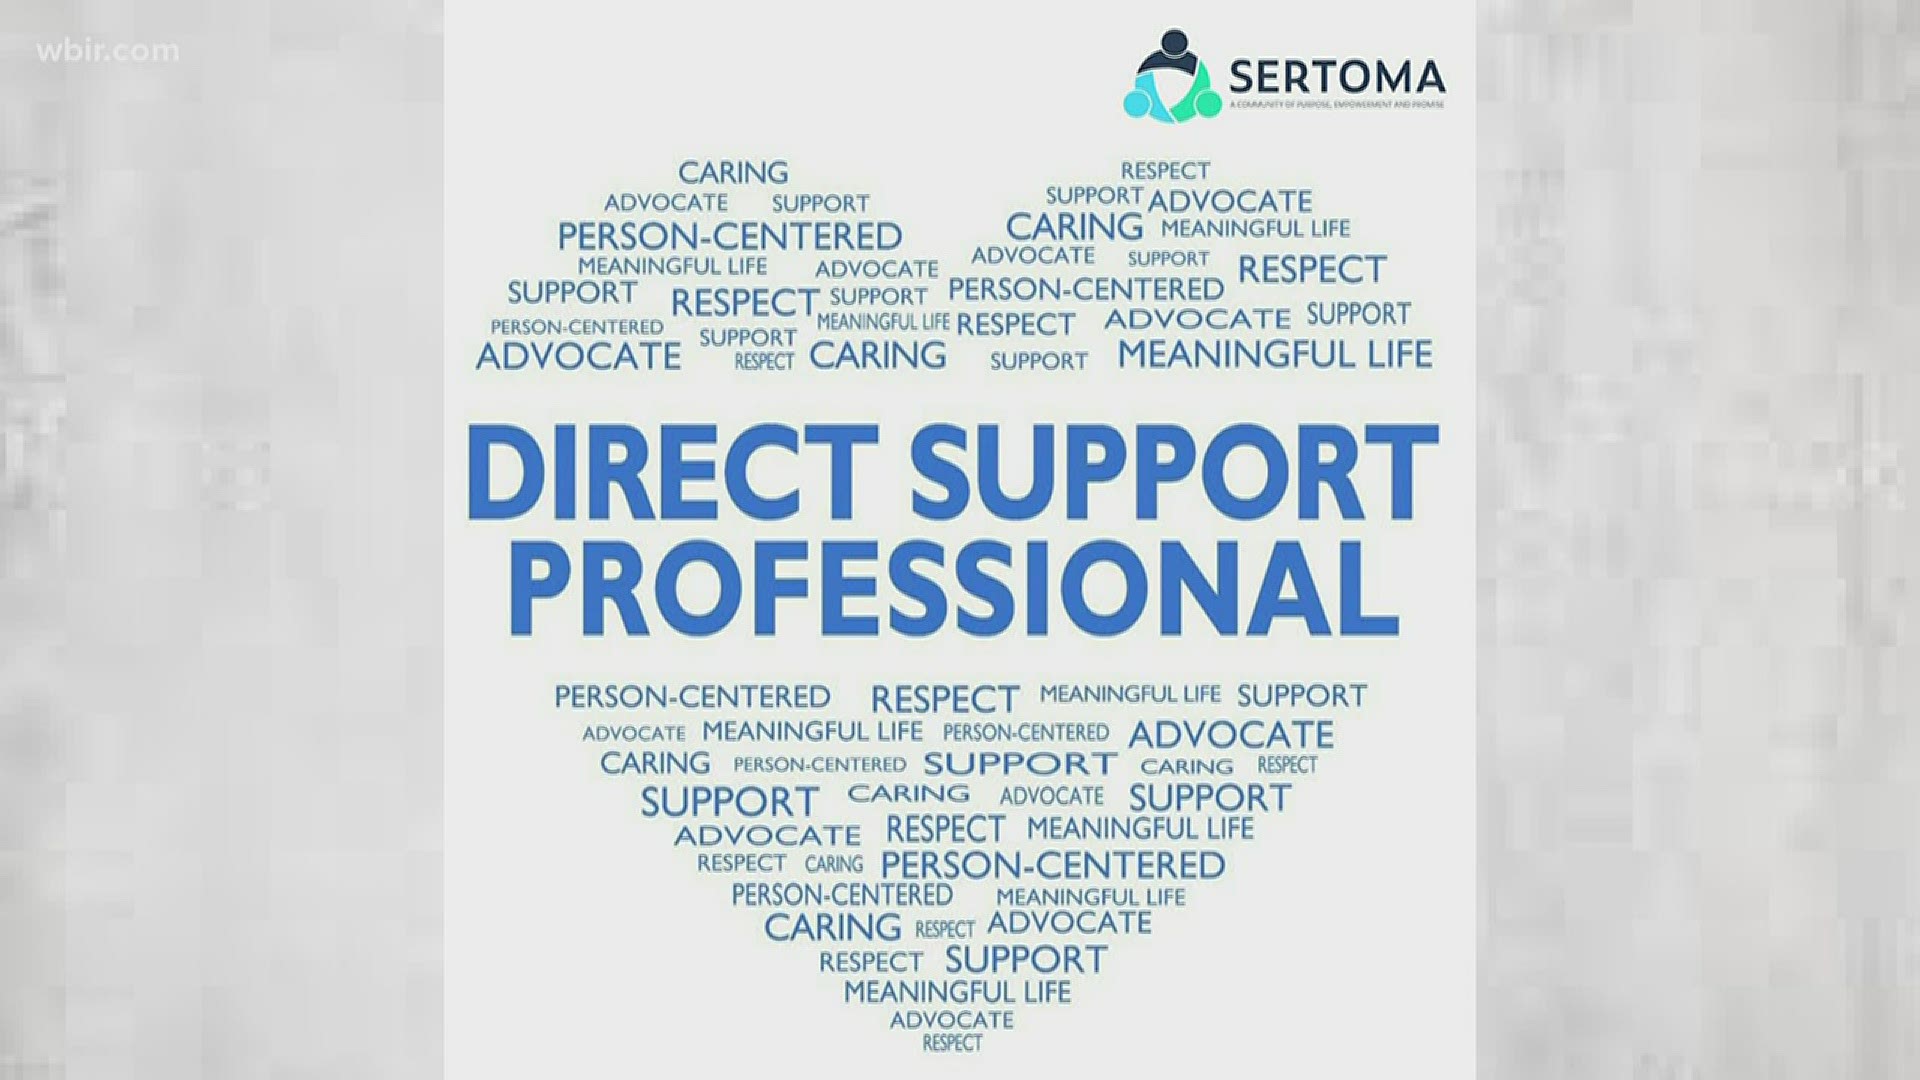 Sertoma serves more than 135 adults with intellectual disabilities